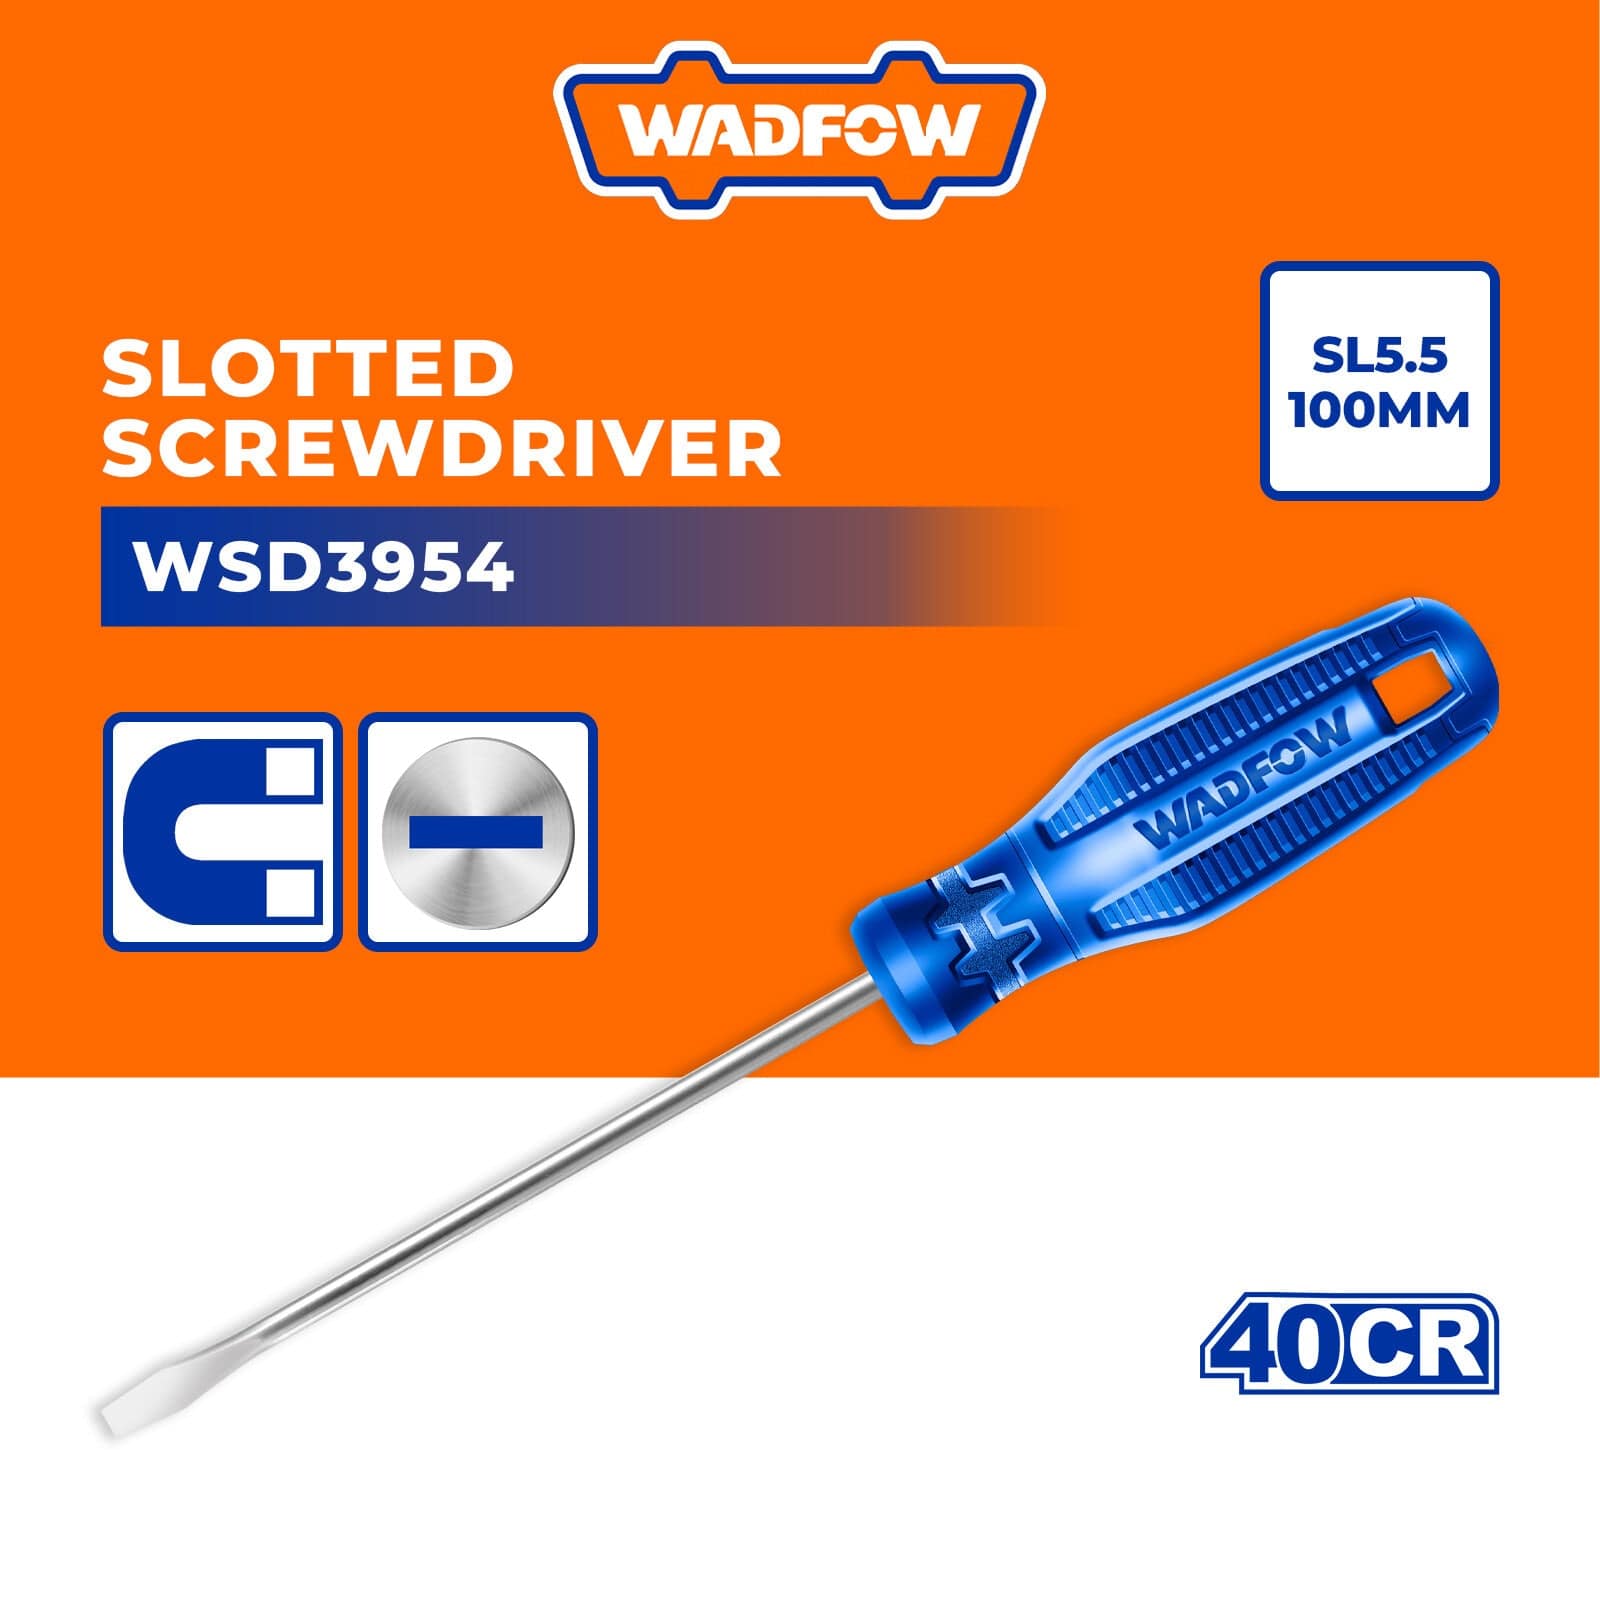 Wadfow 100mm Slotted Screwdriver | Supply Master Accra, Ghana Screwdrivers 5.5x100mm Buy Tools hardware Building materials